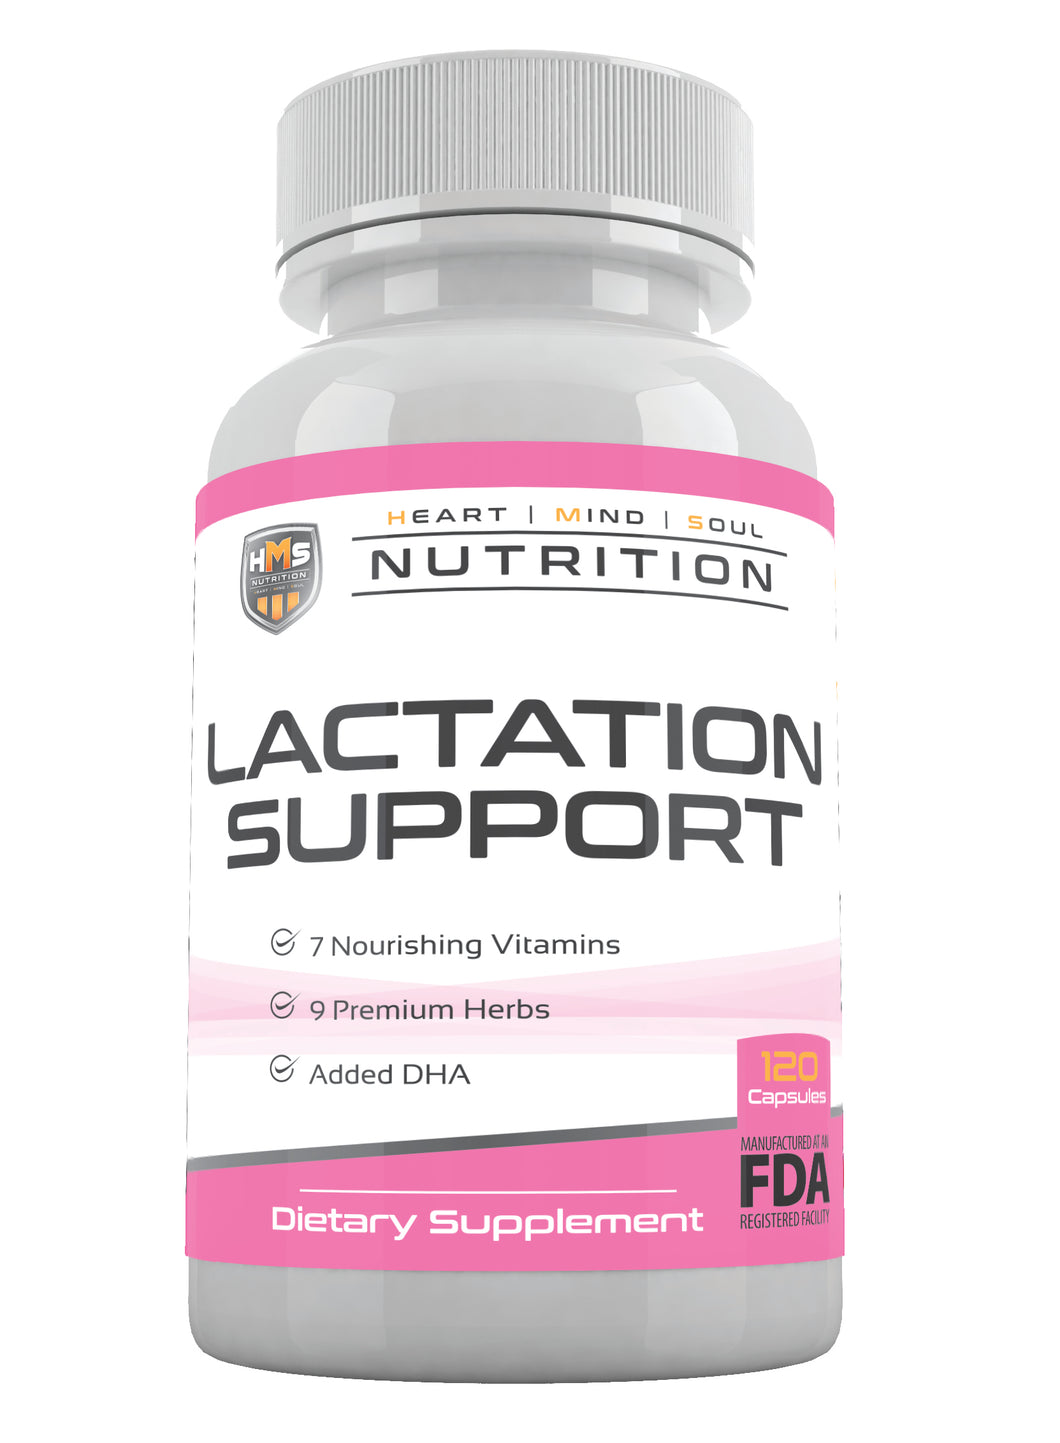 Lactation Supporting Capsules - 120 Vegetable Capsules (60 Day Supply)